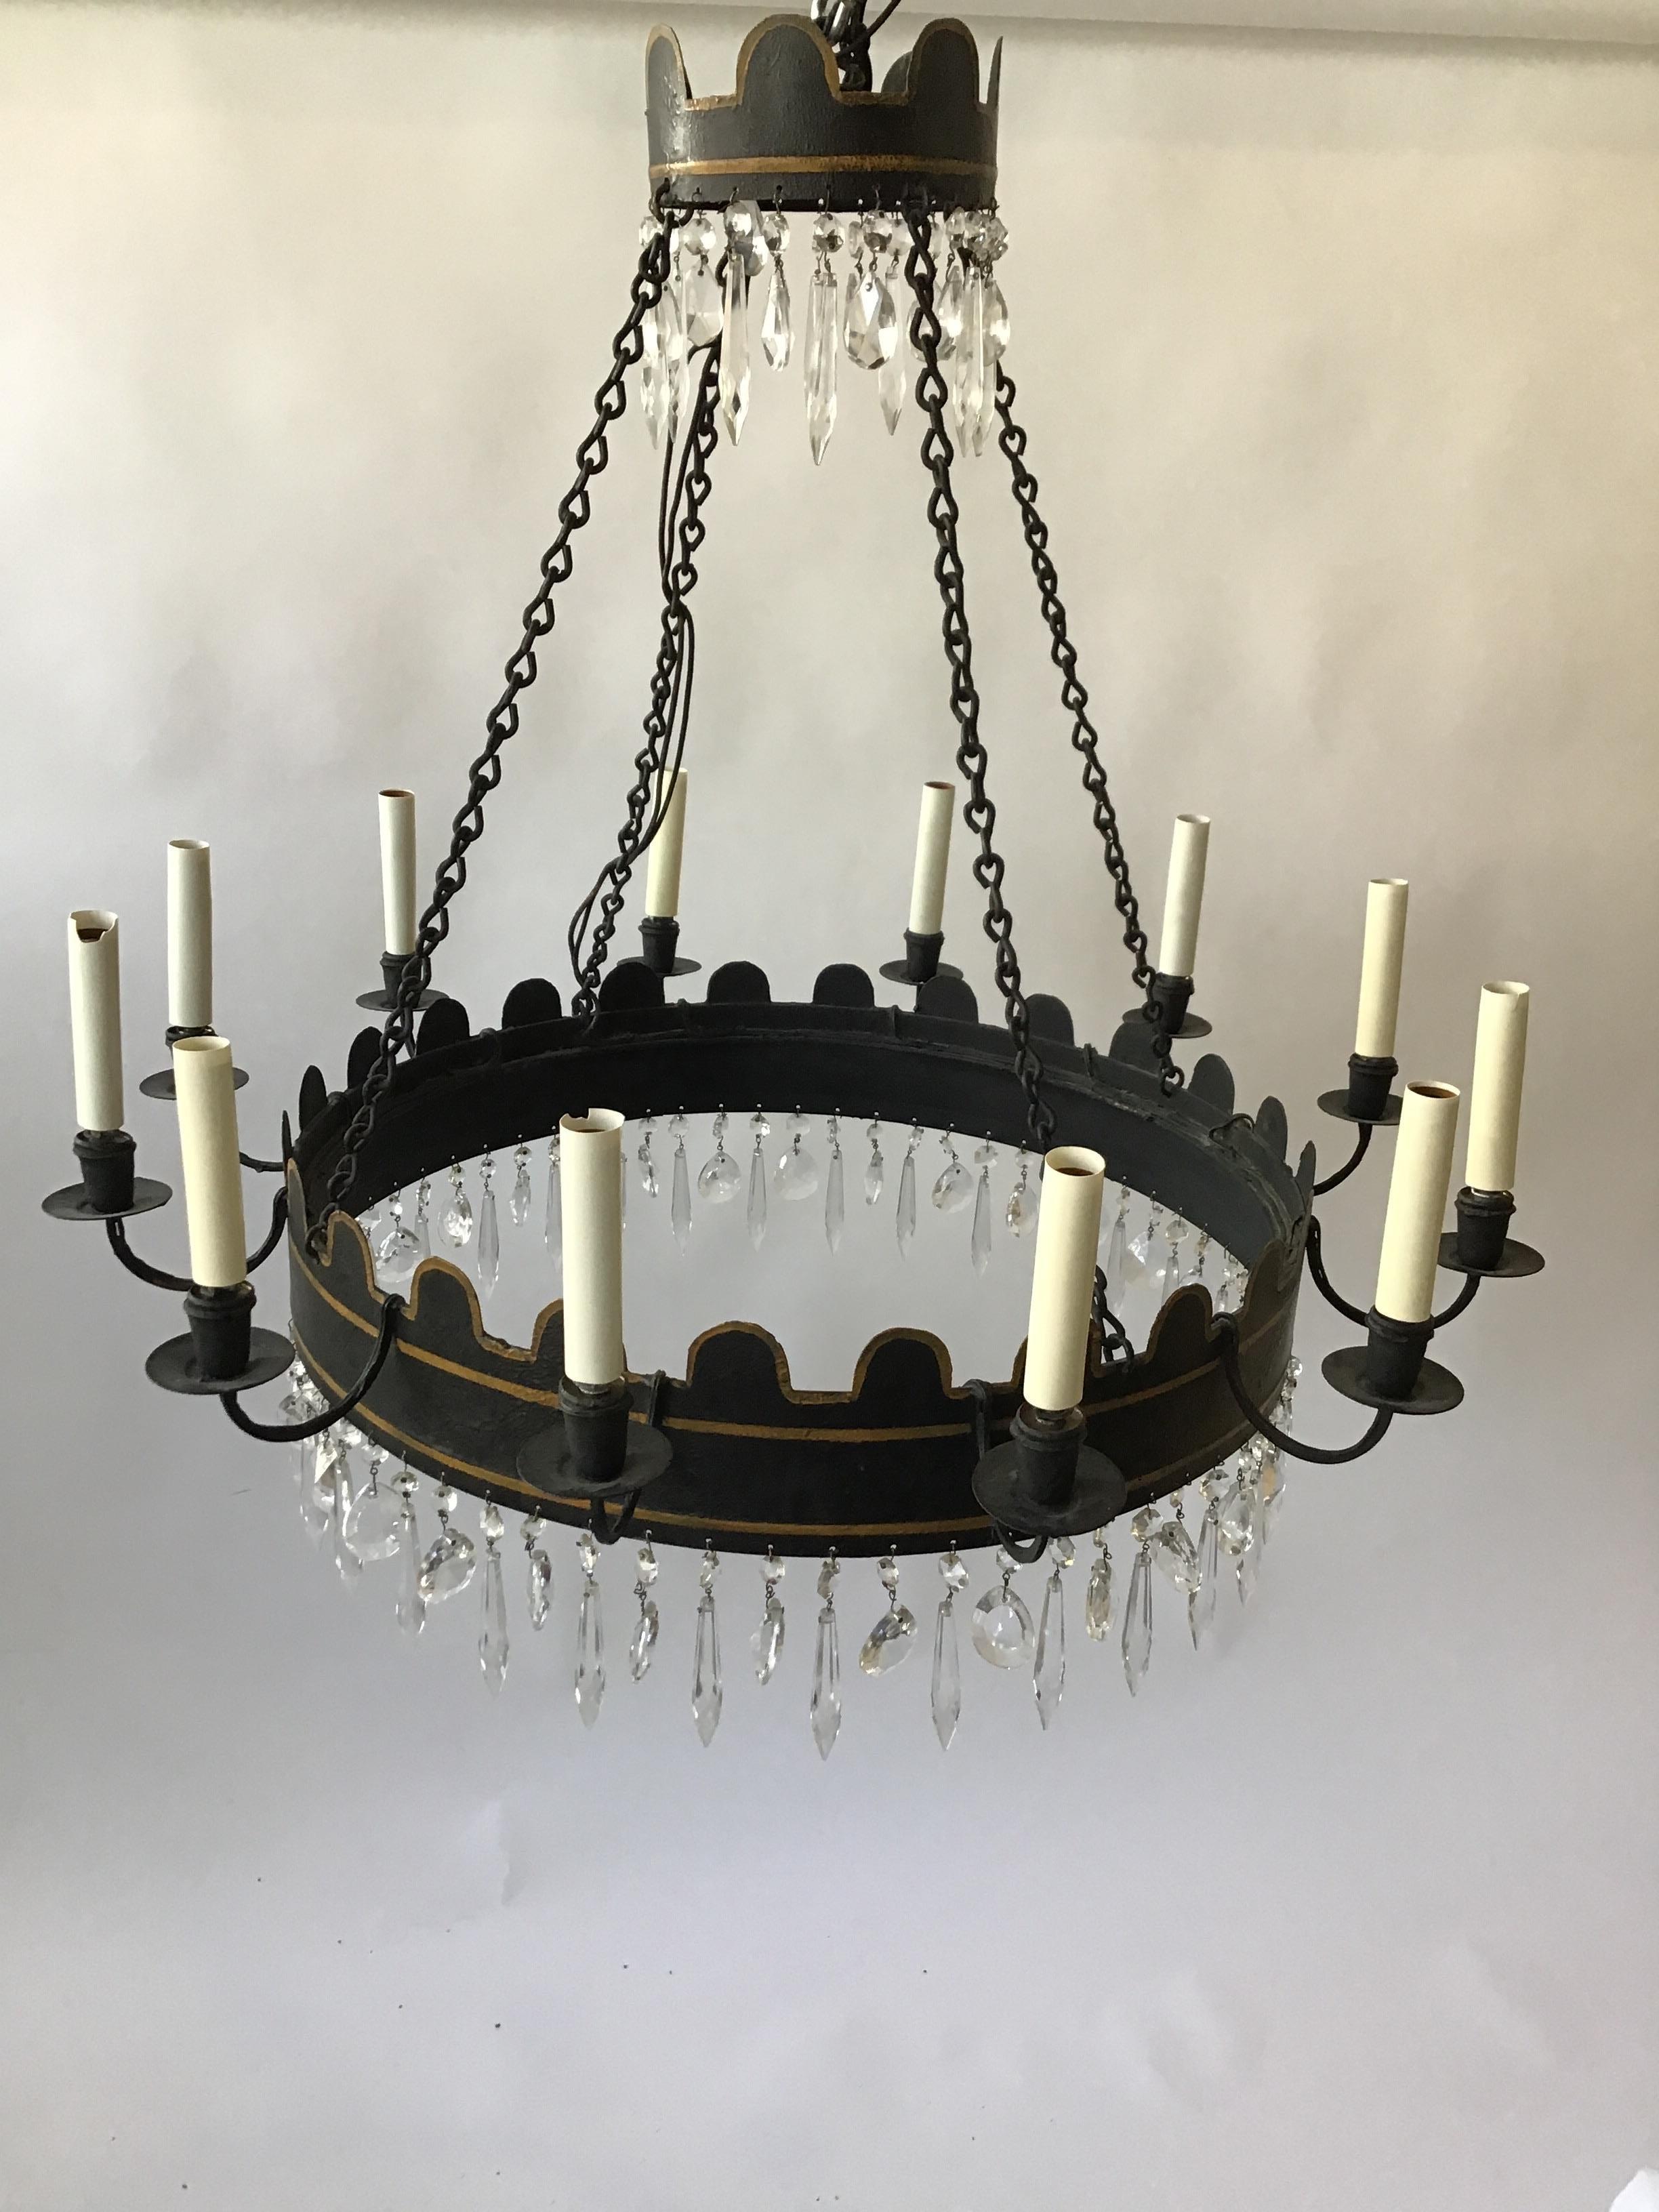 1960s two-tier tole/crystal chandelier. From a Scarsdale, NY estate.